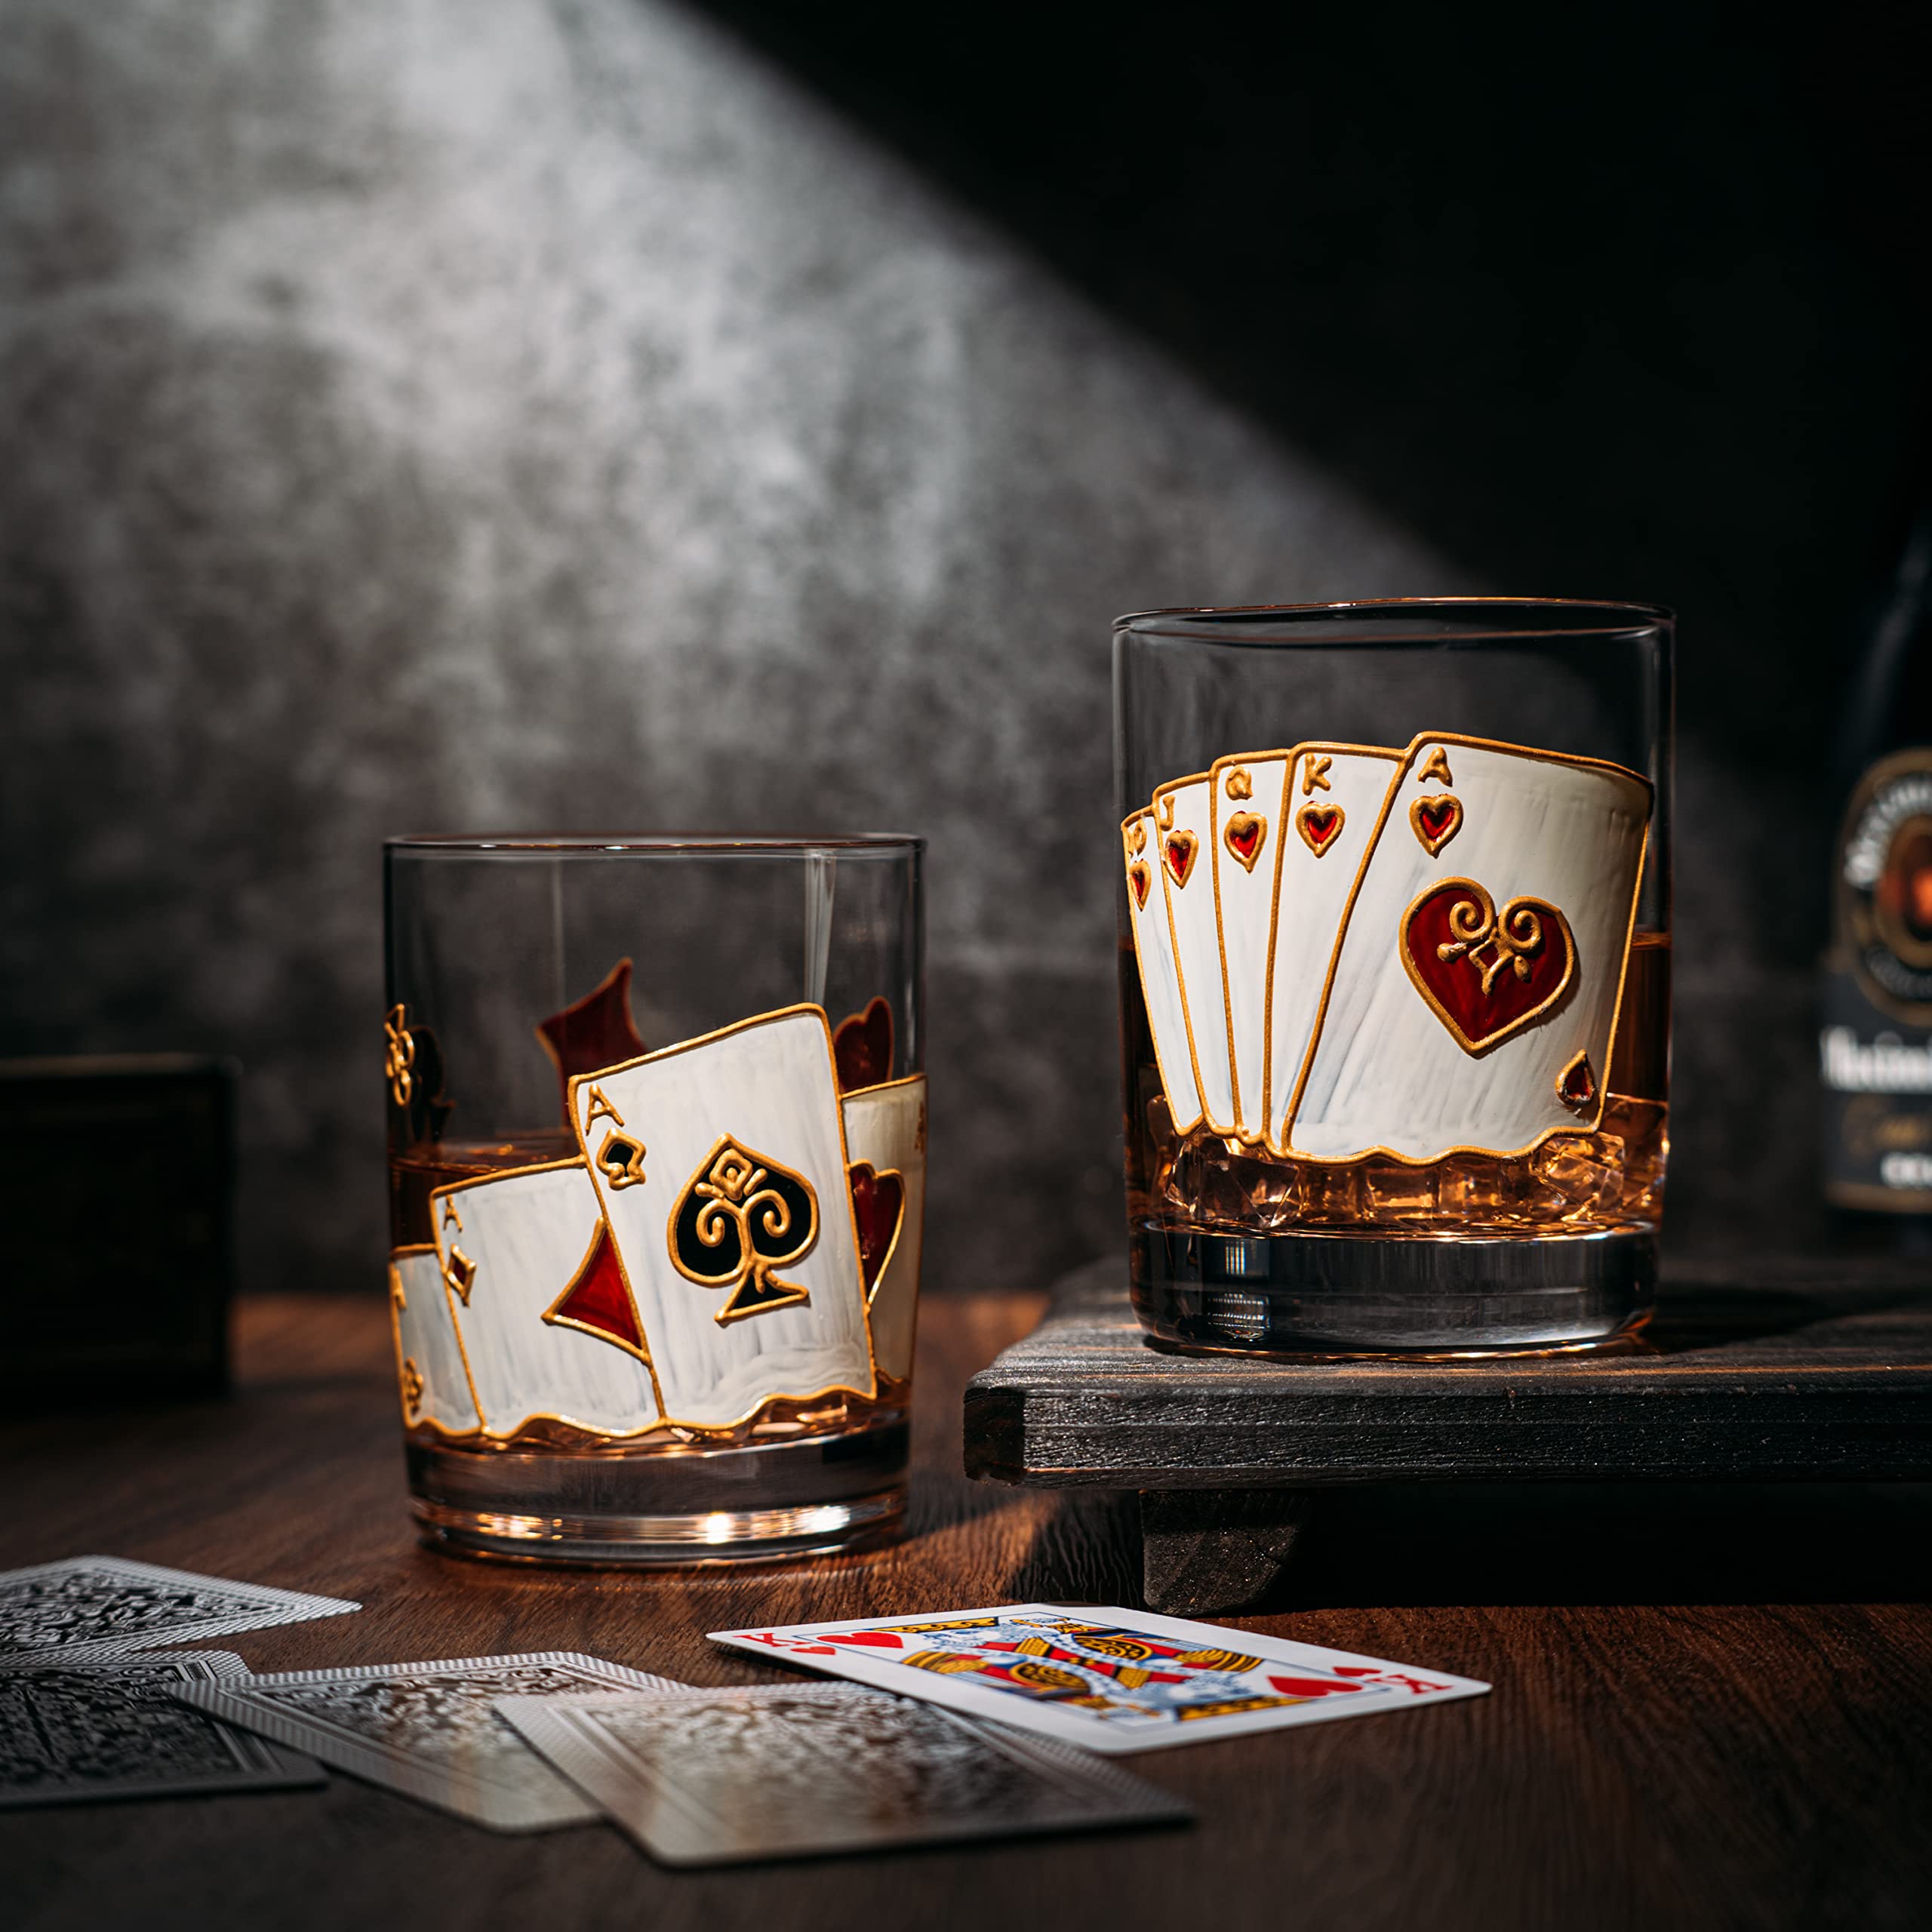 The Wine Savant Playing Cards Drinking Glasses - Artisanal Hand Painted Players Casino Set of 2 Water, Wine & Whiskey Glasses Crystal Glassware - Gift Idea for Him, Birthday, Housewarming - 12oz